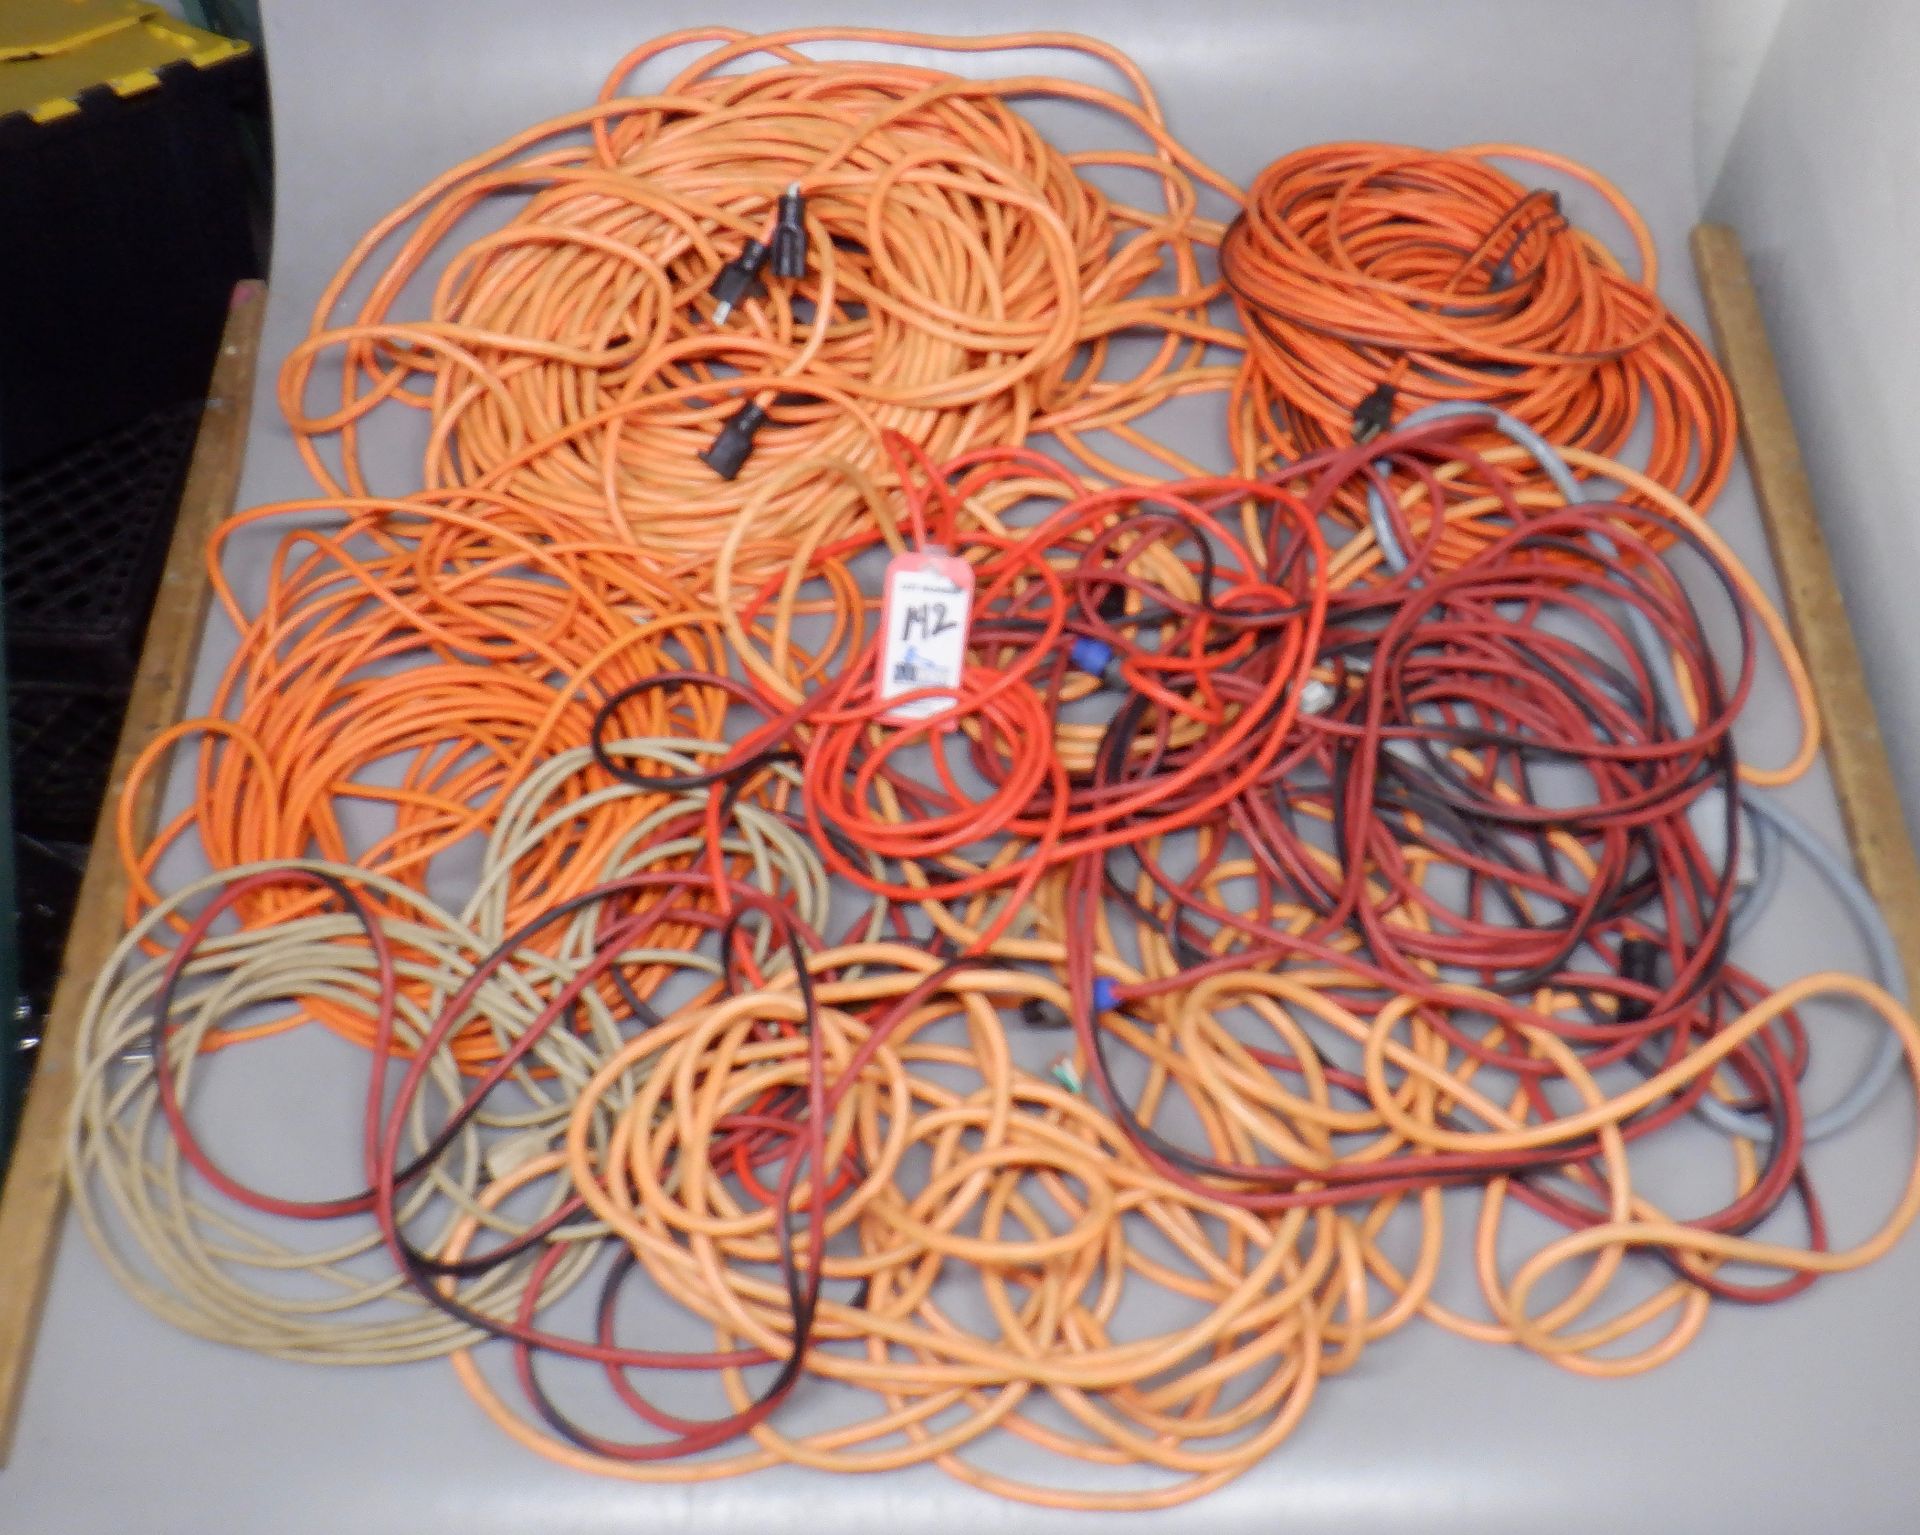 BOX EXTENSION CORDS